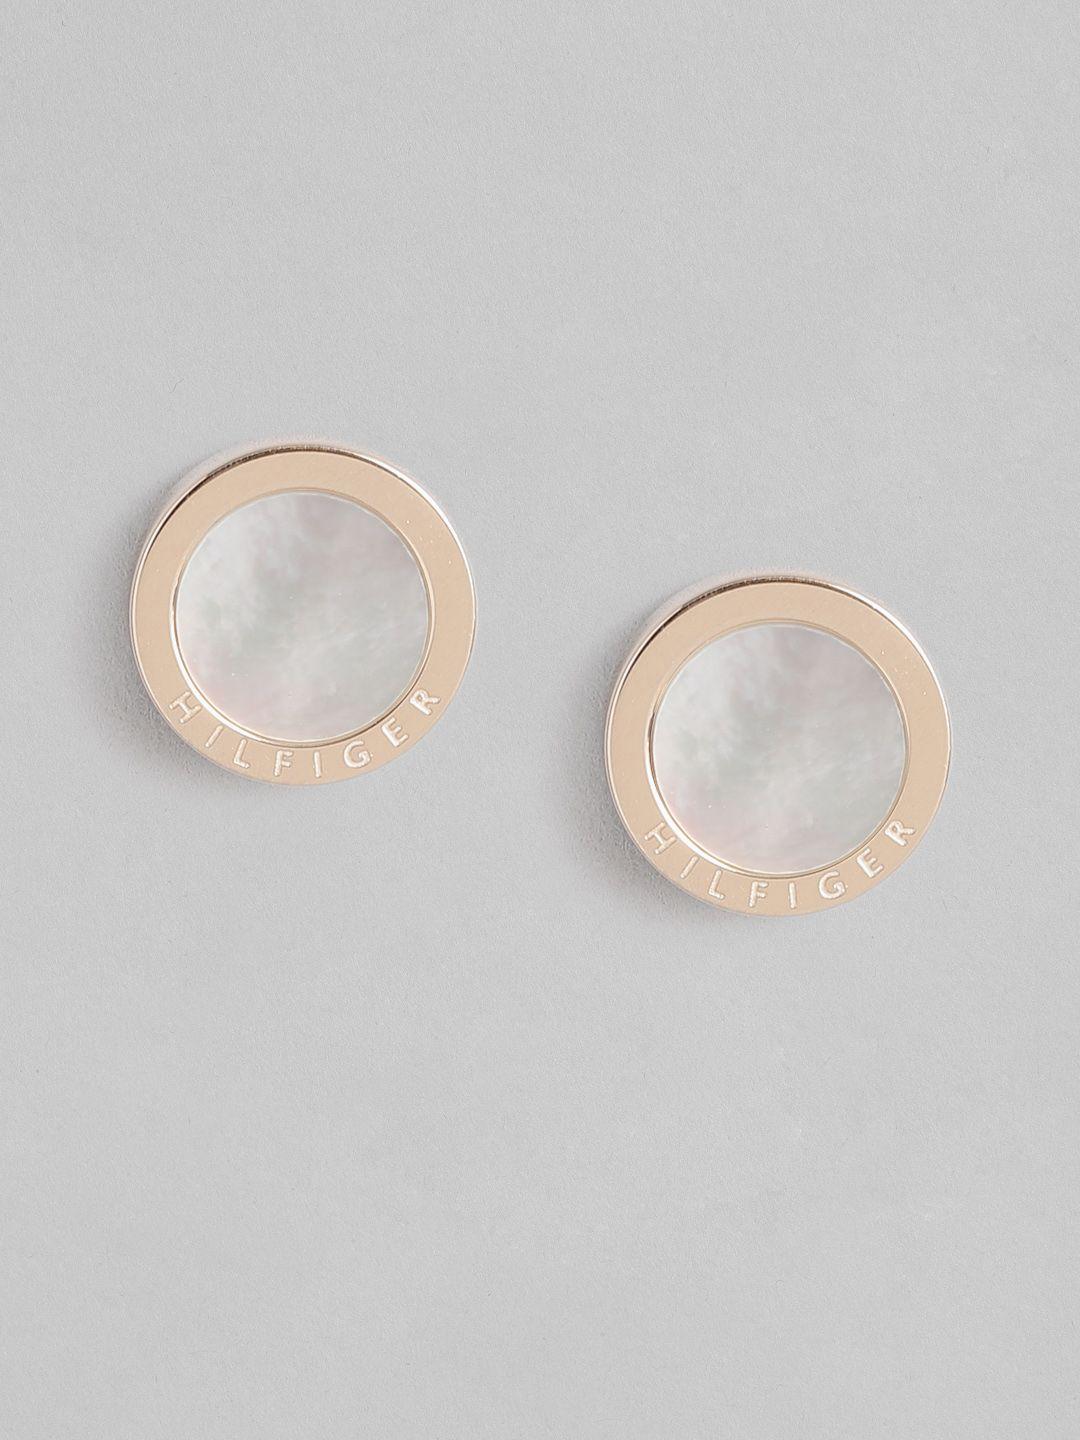 tommy hilfiger iconic circular stud earrings